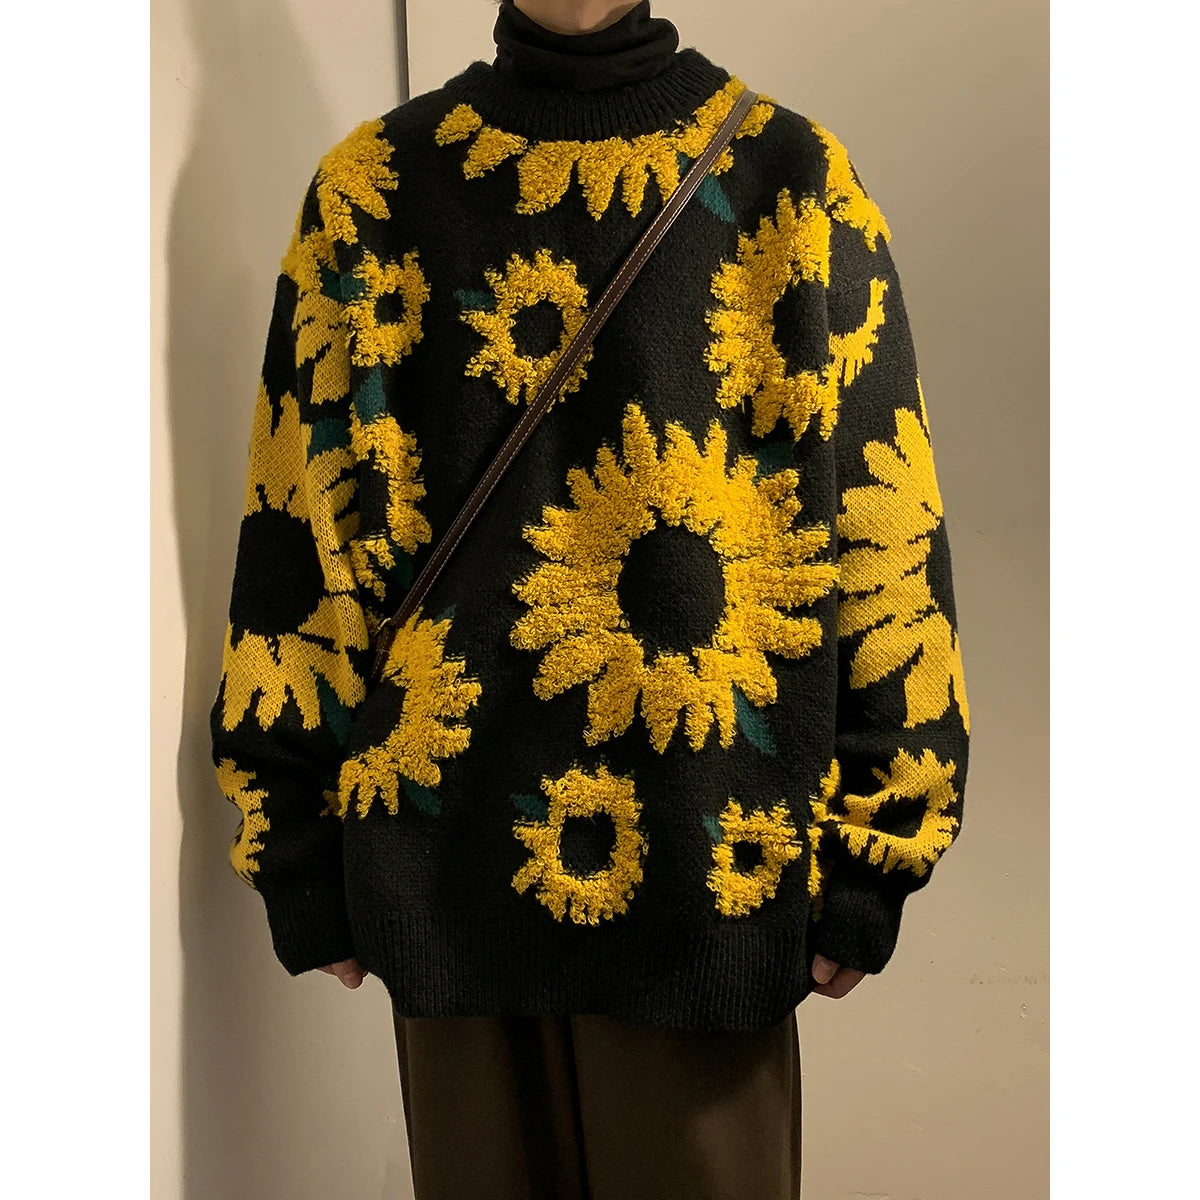 Winter Sunflower Warm Sweaters Male O-Neck Pullovers Sweater for Men Loose Casual Sweater Oversize Thick Knitted Couple Unisex